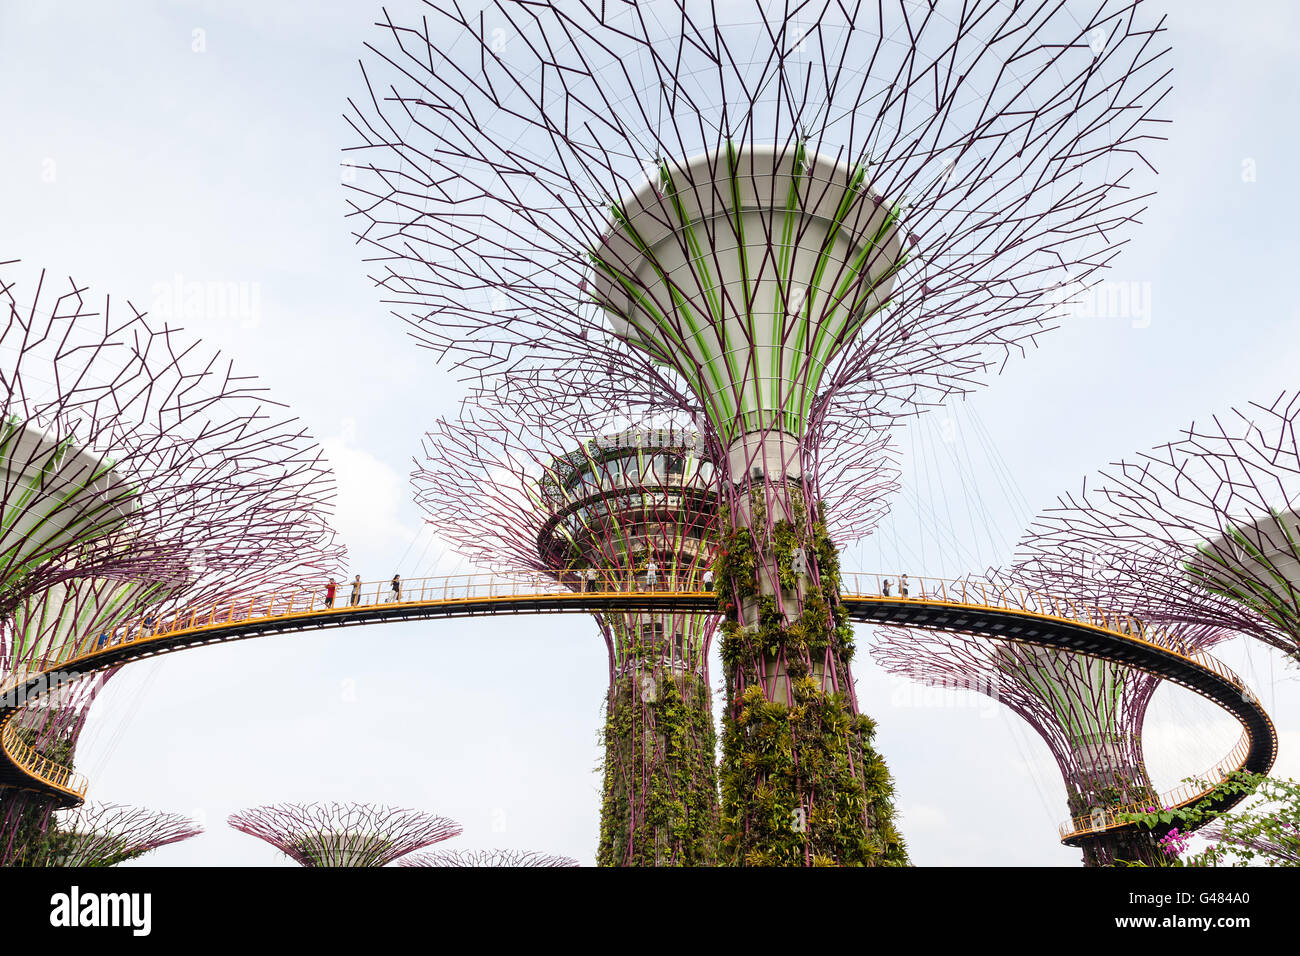 Singapore, Singapore - July 13, 2015: Aerial fisheye view of the Supertree Grove at Gardens by the Bay. Stock Photo